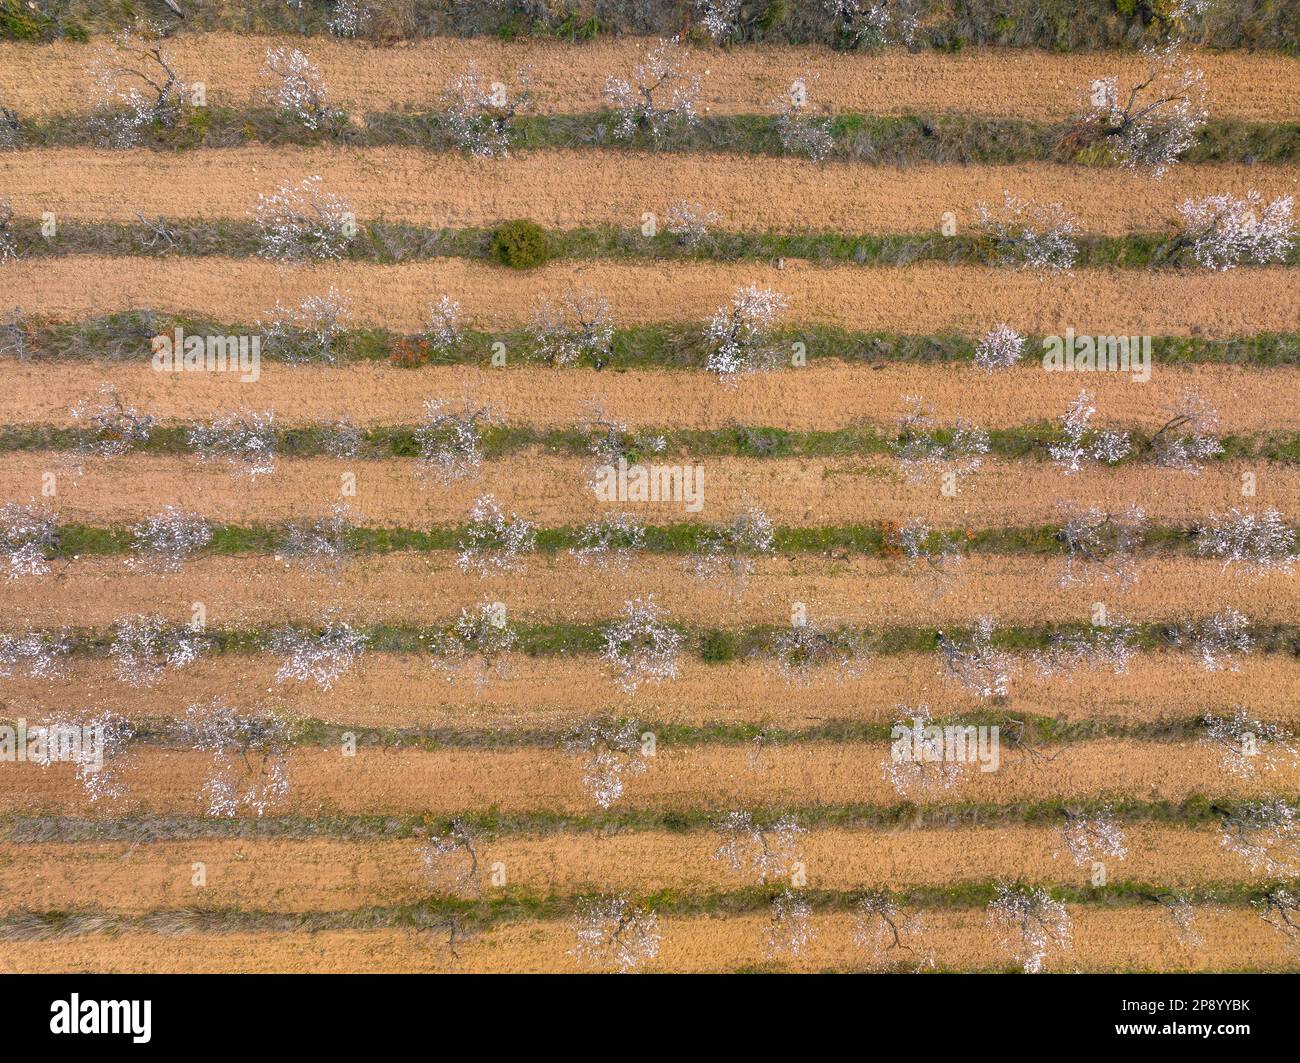 Aerial view of almond blossom fields in spring in a farm near the Canaletes river between Horta and Bot (Terra Alta, Tarragona, Catalonia, Spain) Stock Photo